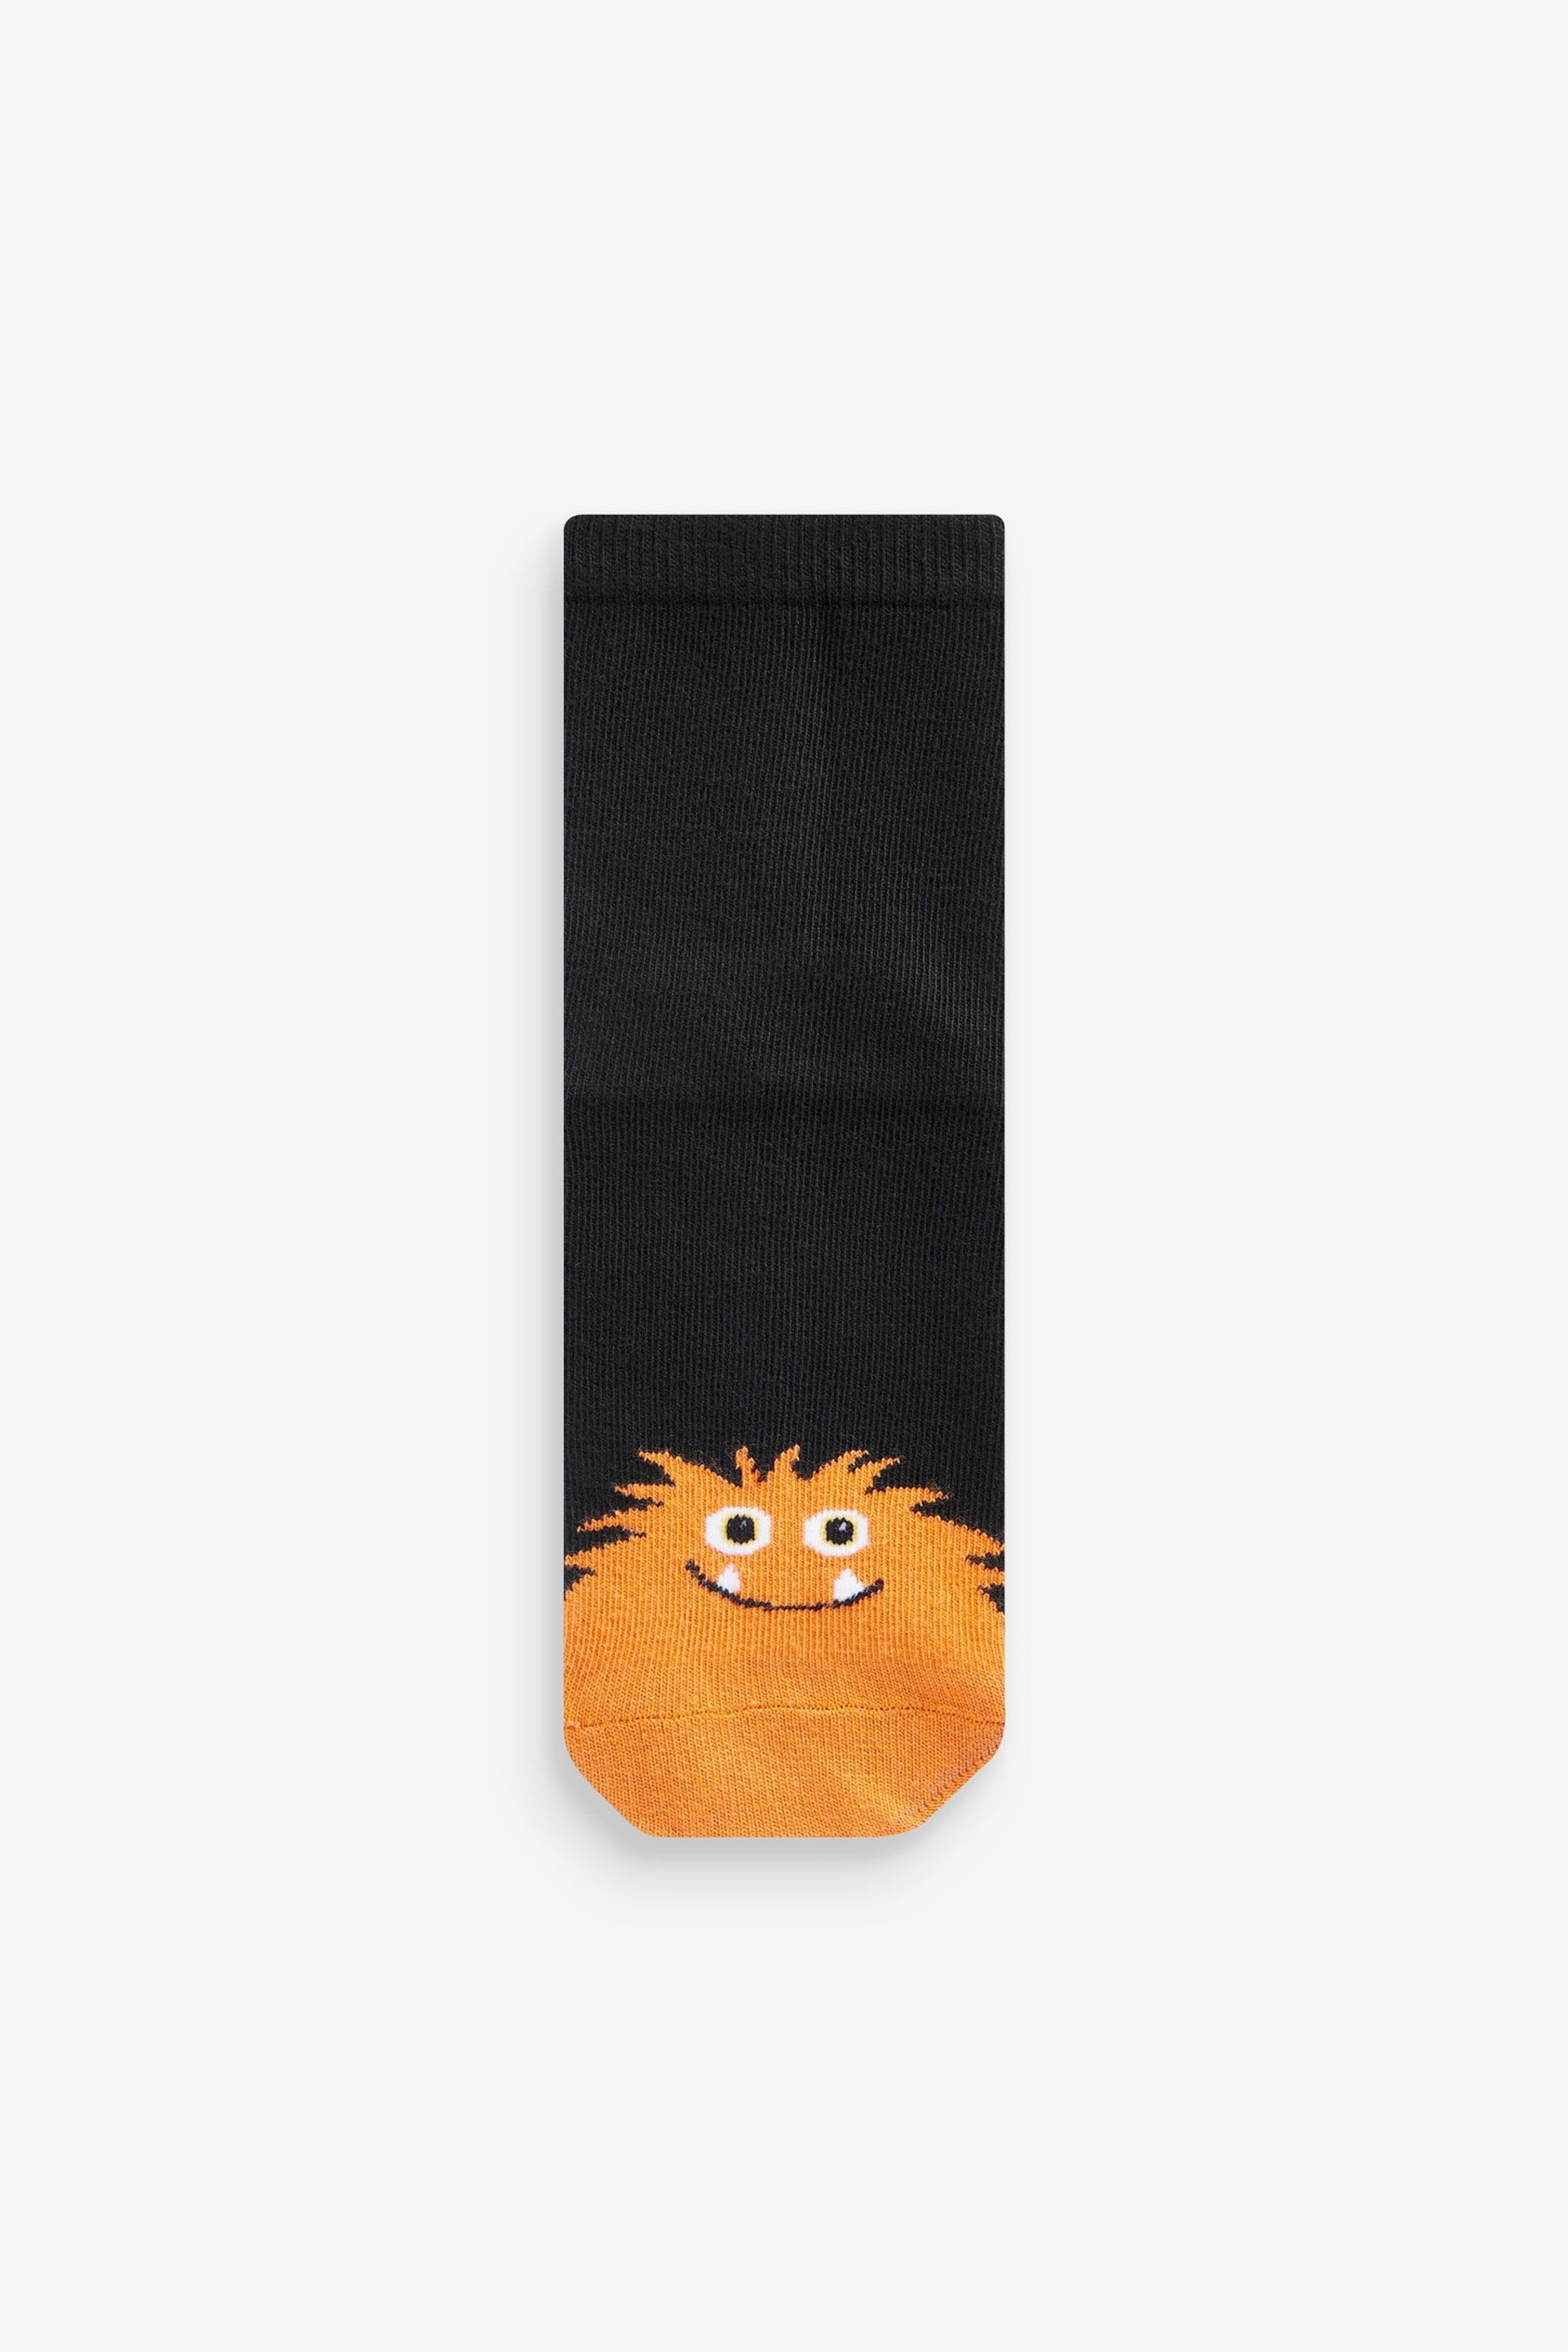 Black/Bright Monsters Cotton Rich Socks 10 Pack - Image 10 of 11